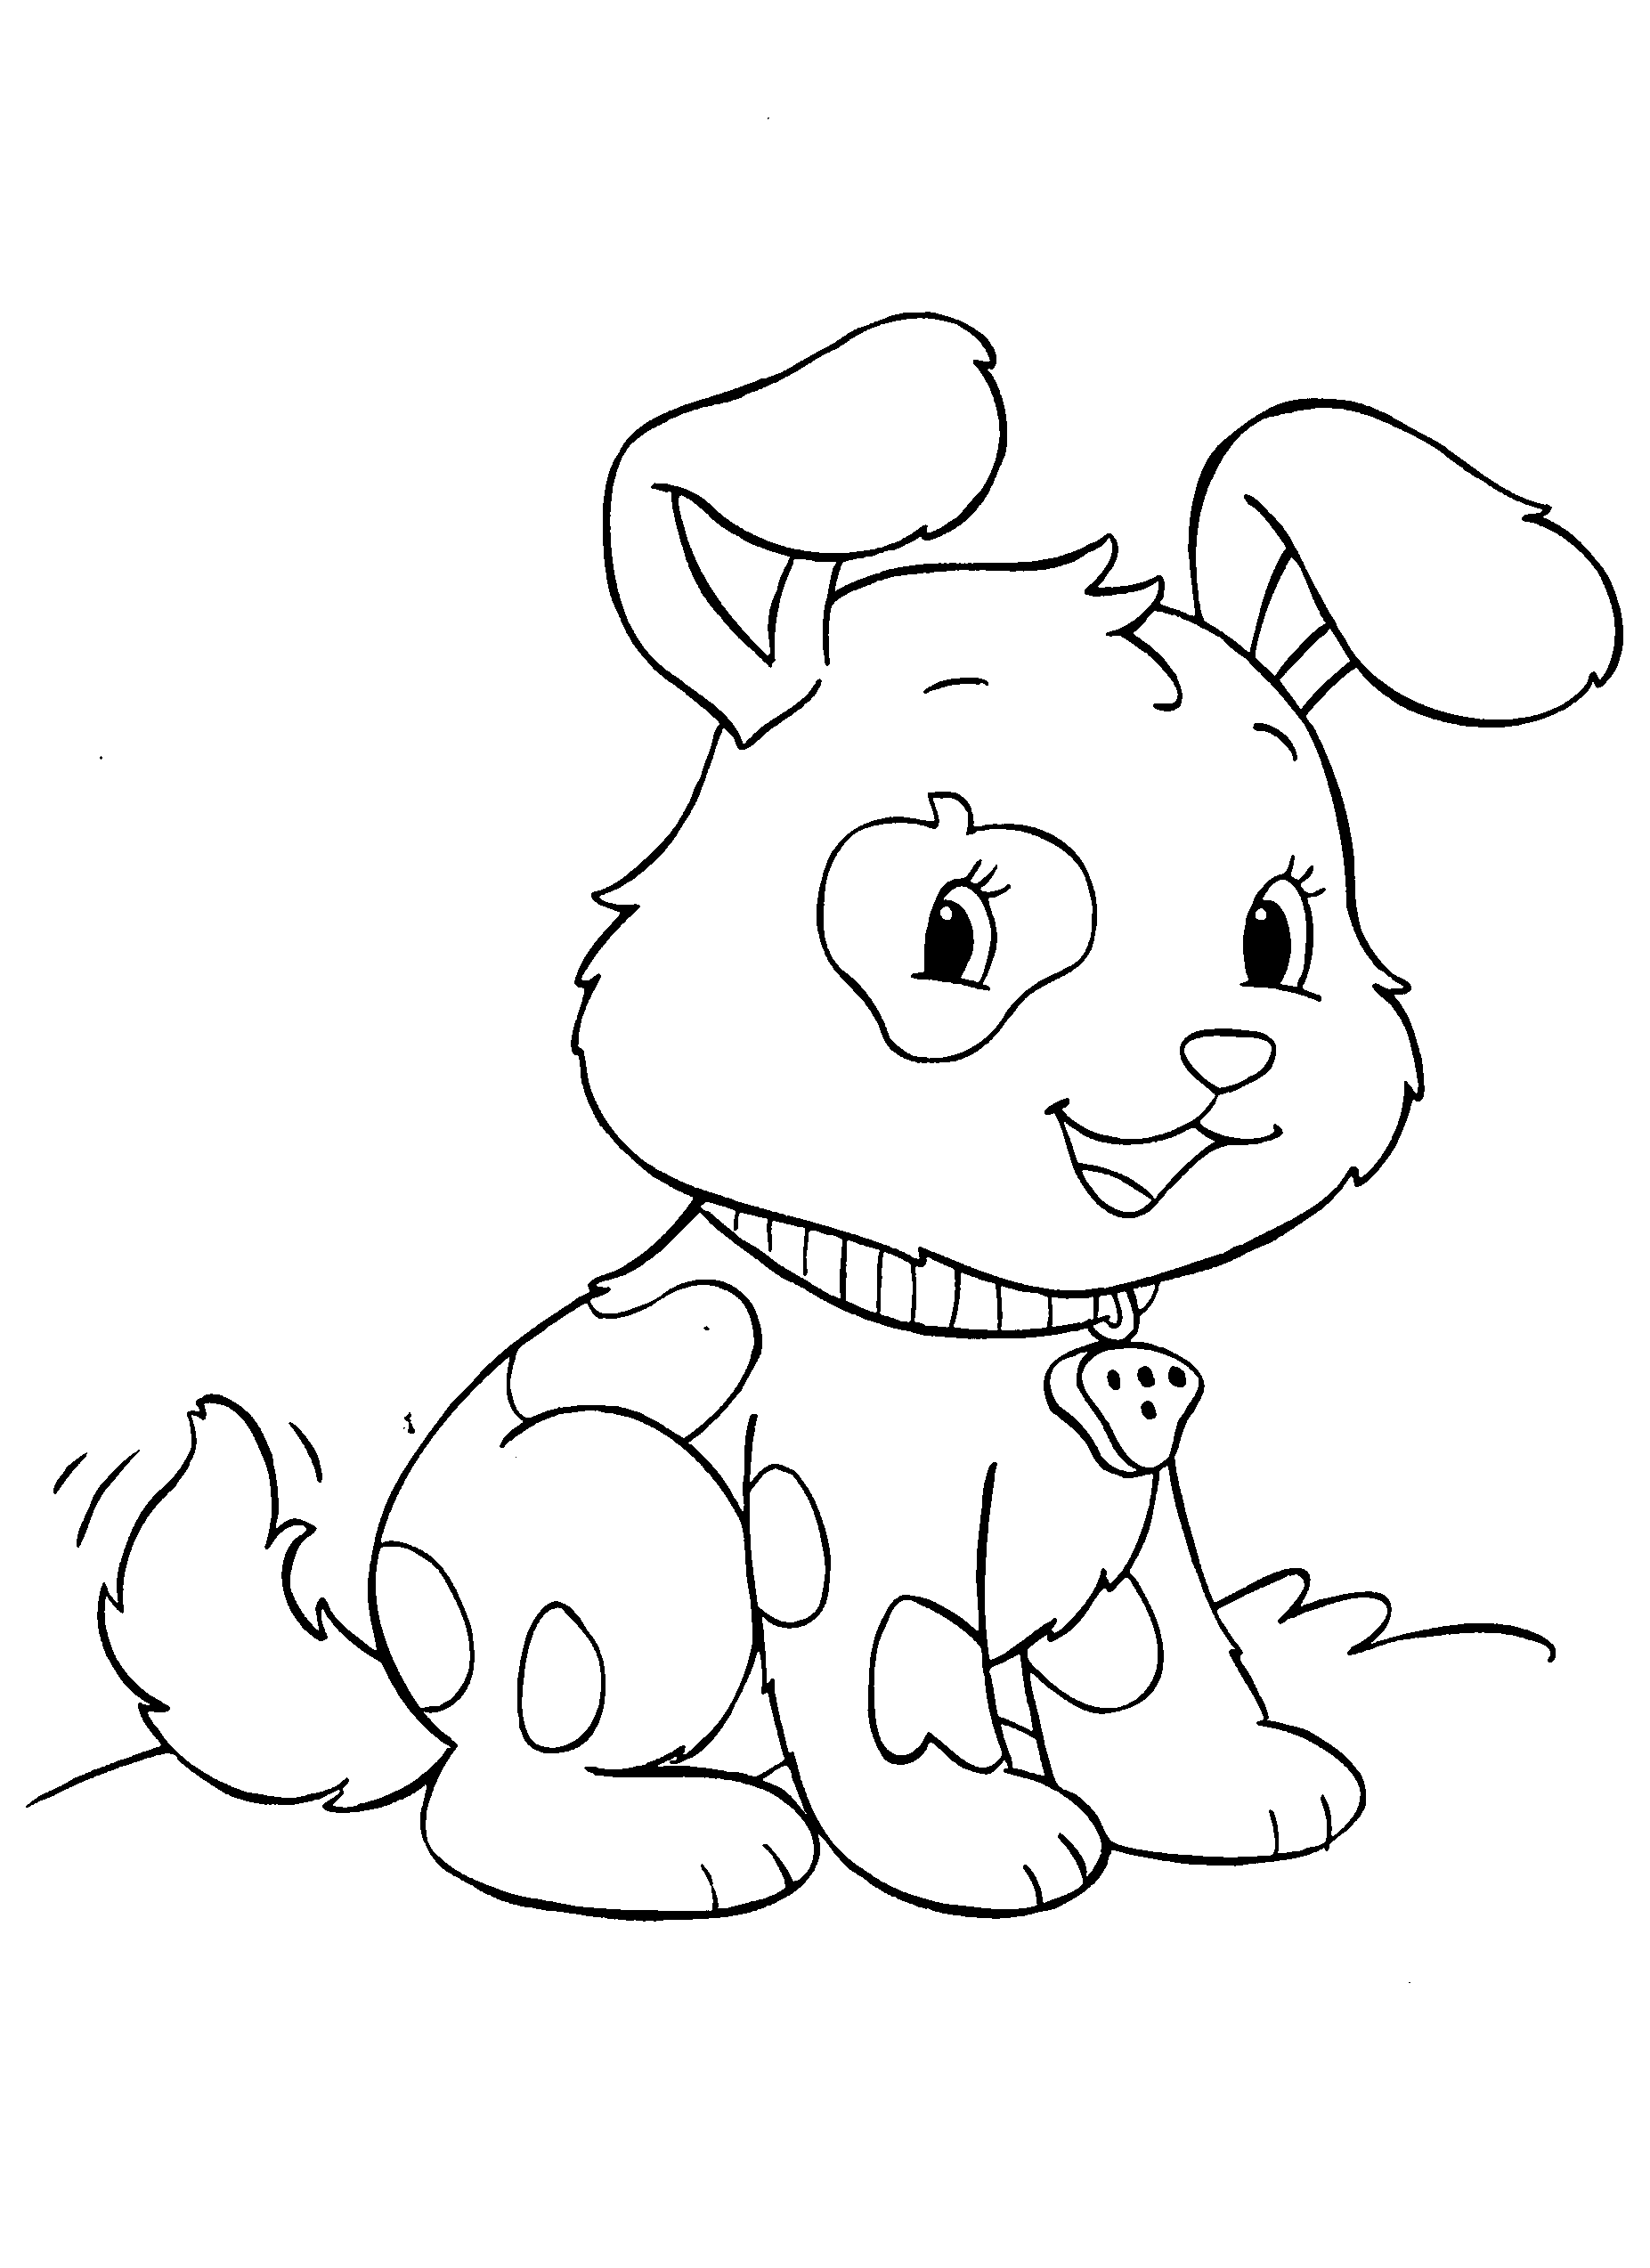 Puppy Coloring Pages and Book | UniqueColoringPages